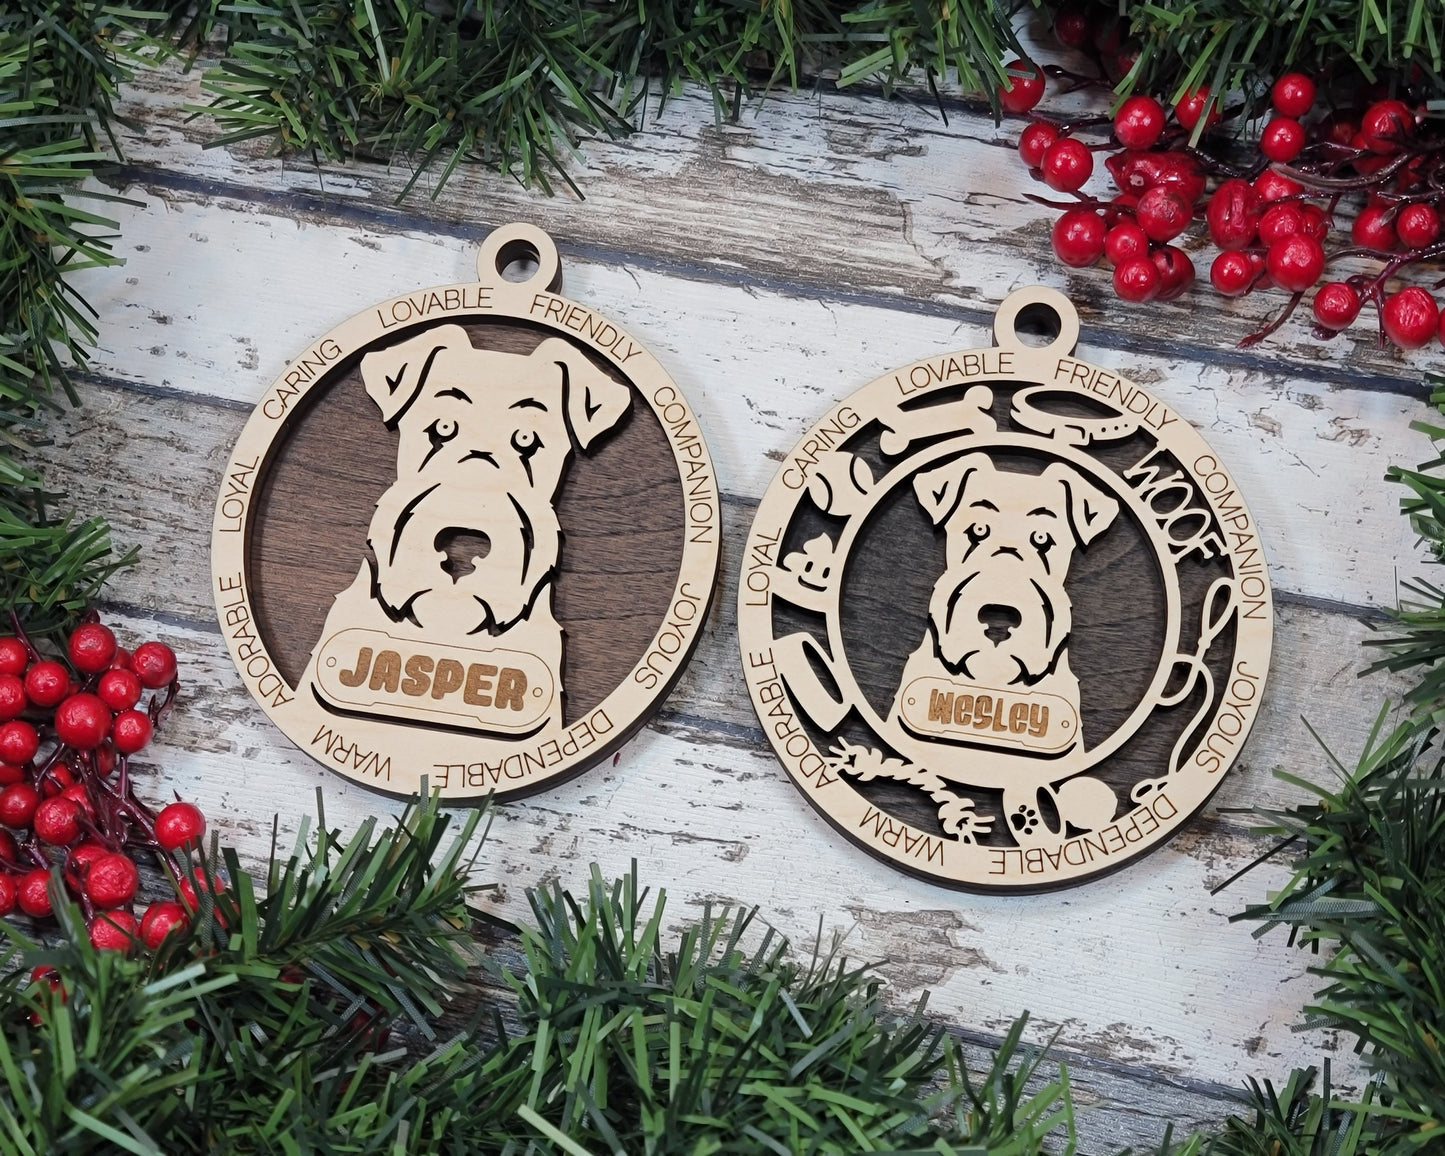 Airedale Terrier - Adorable Dog Ornaments - 2 Ornaments included - SVG, PDF, AI File Download - Sized for Glowforge